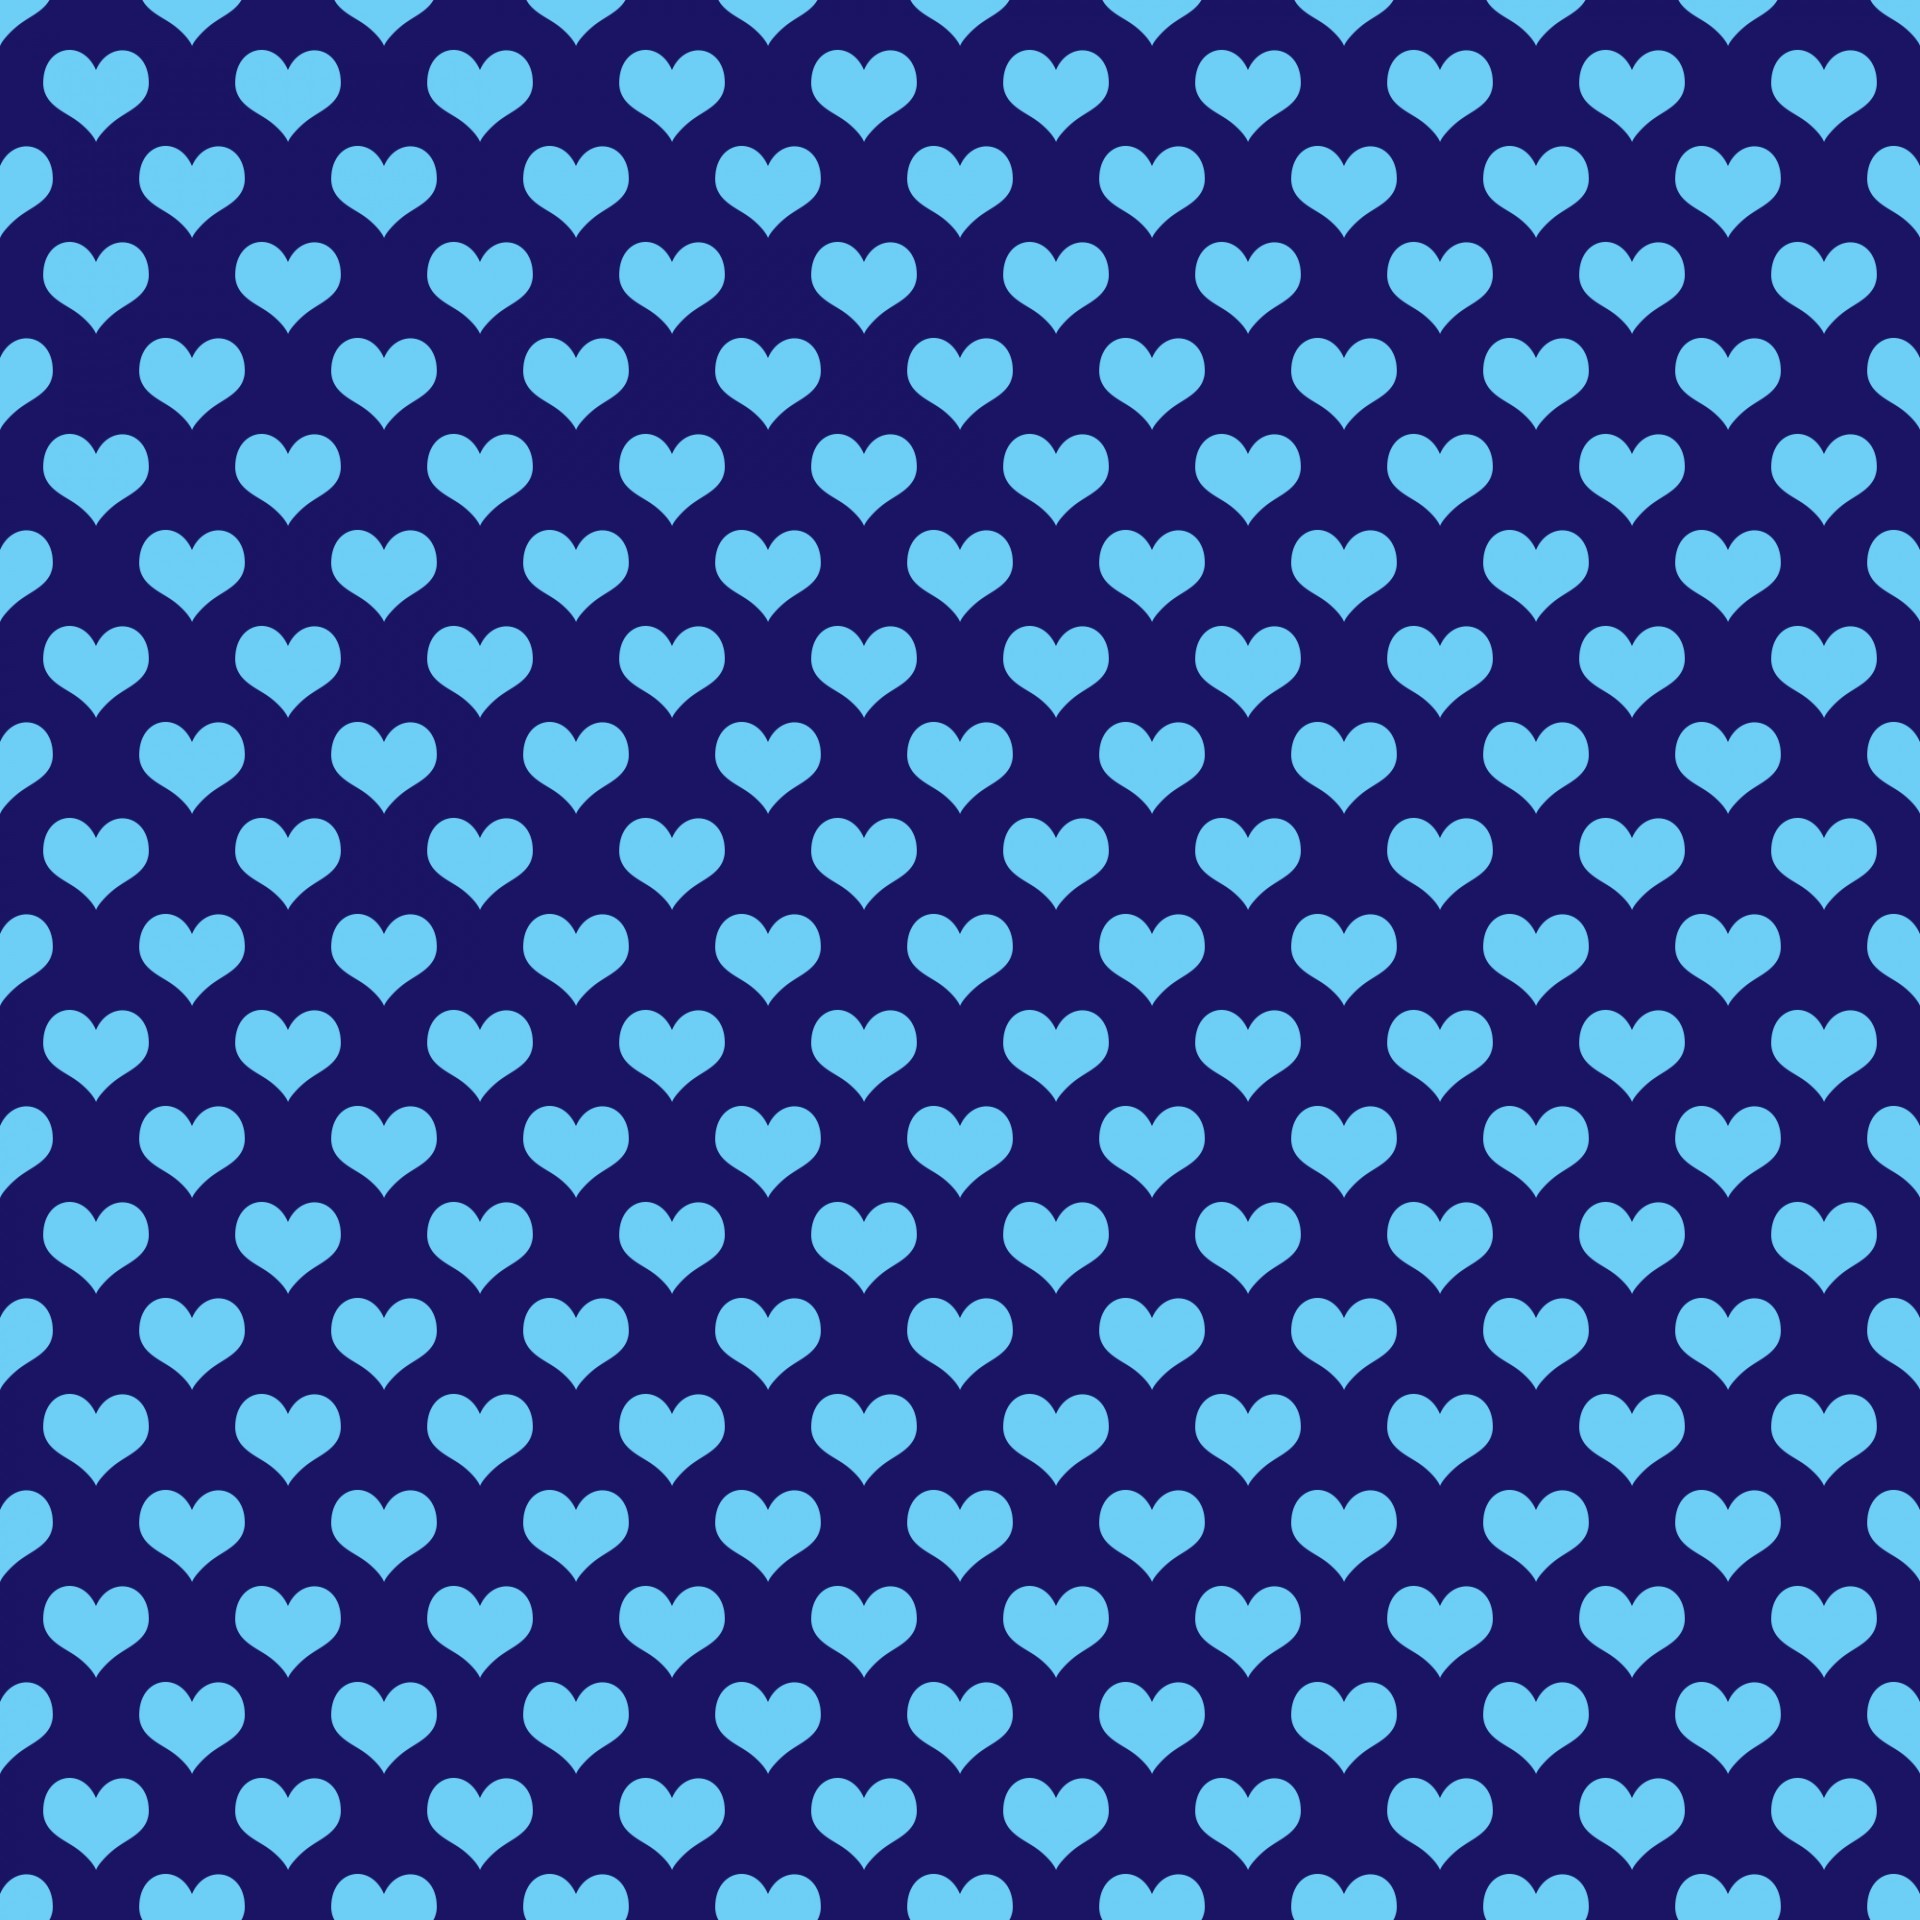 1920x1920 Hearts Background Wallpaper Blue Free Stock Photo - Public Domain Pictures